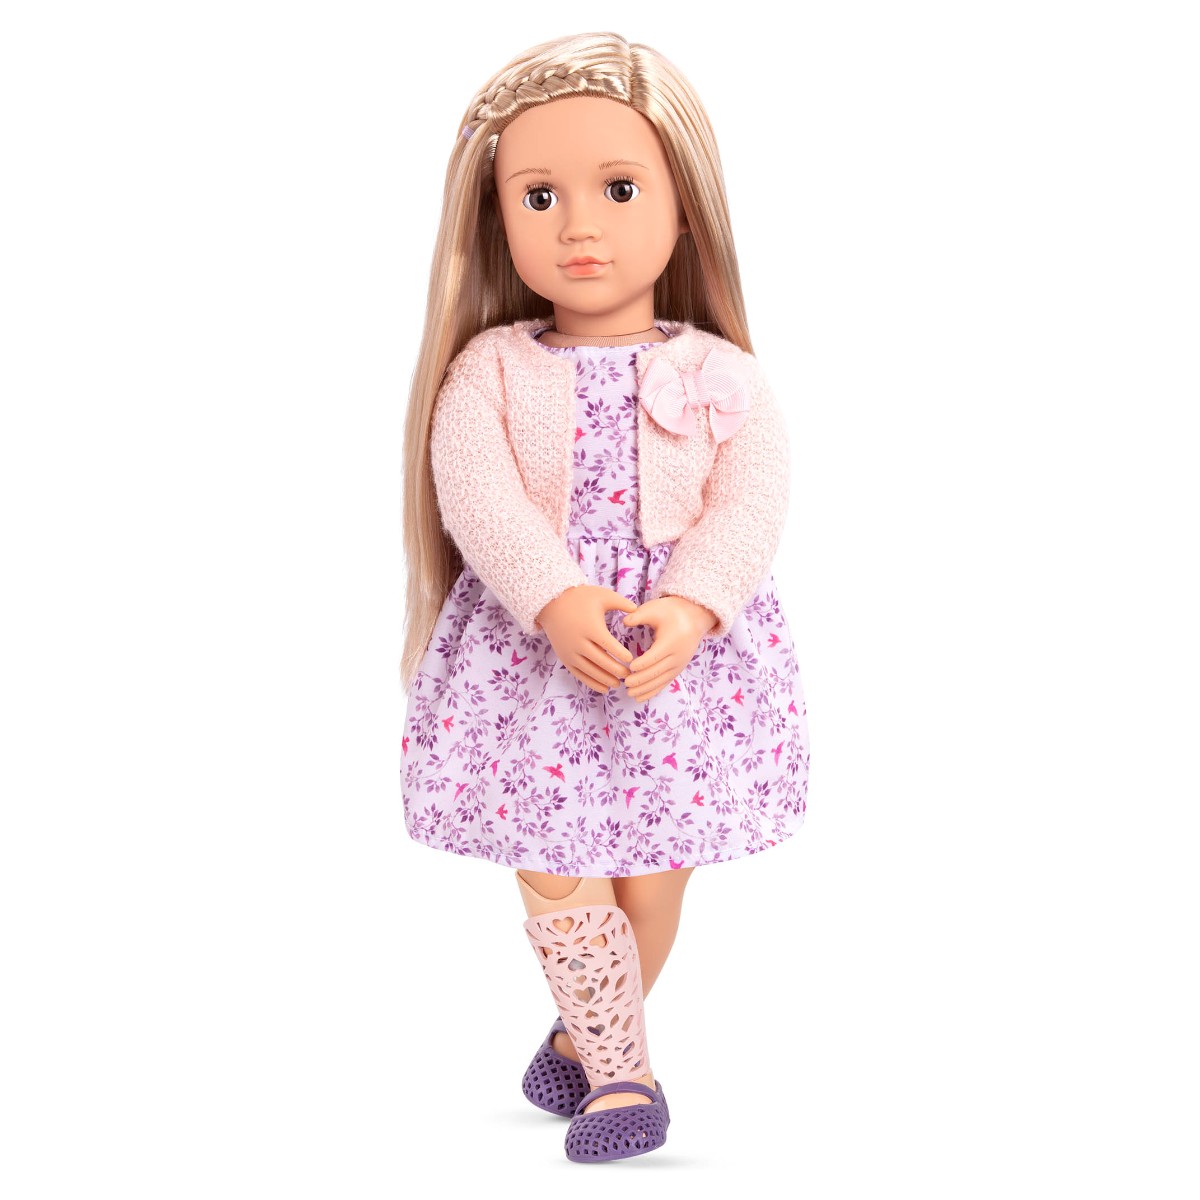 Our Generation - Kacy doll with Prosthetic Leg (731311)